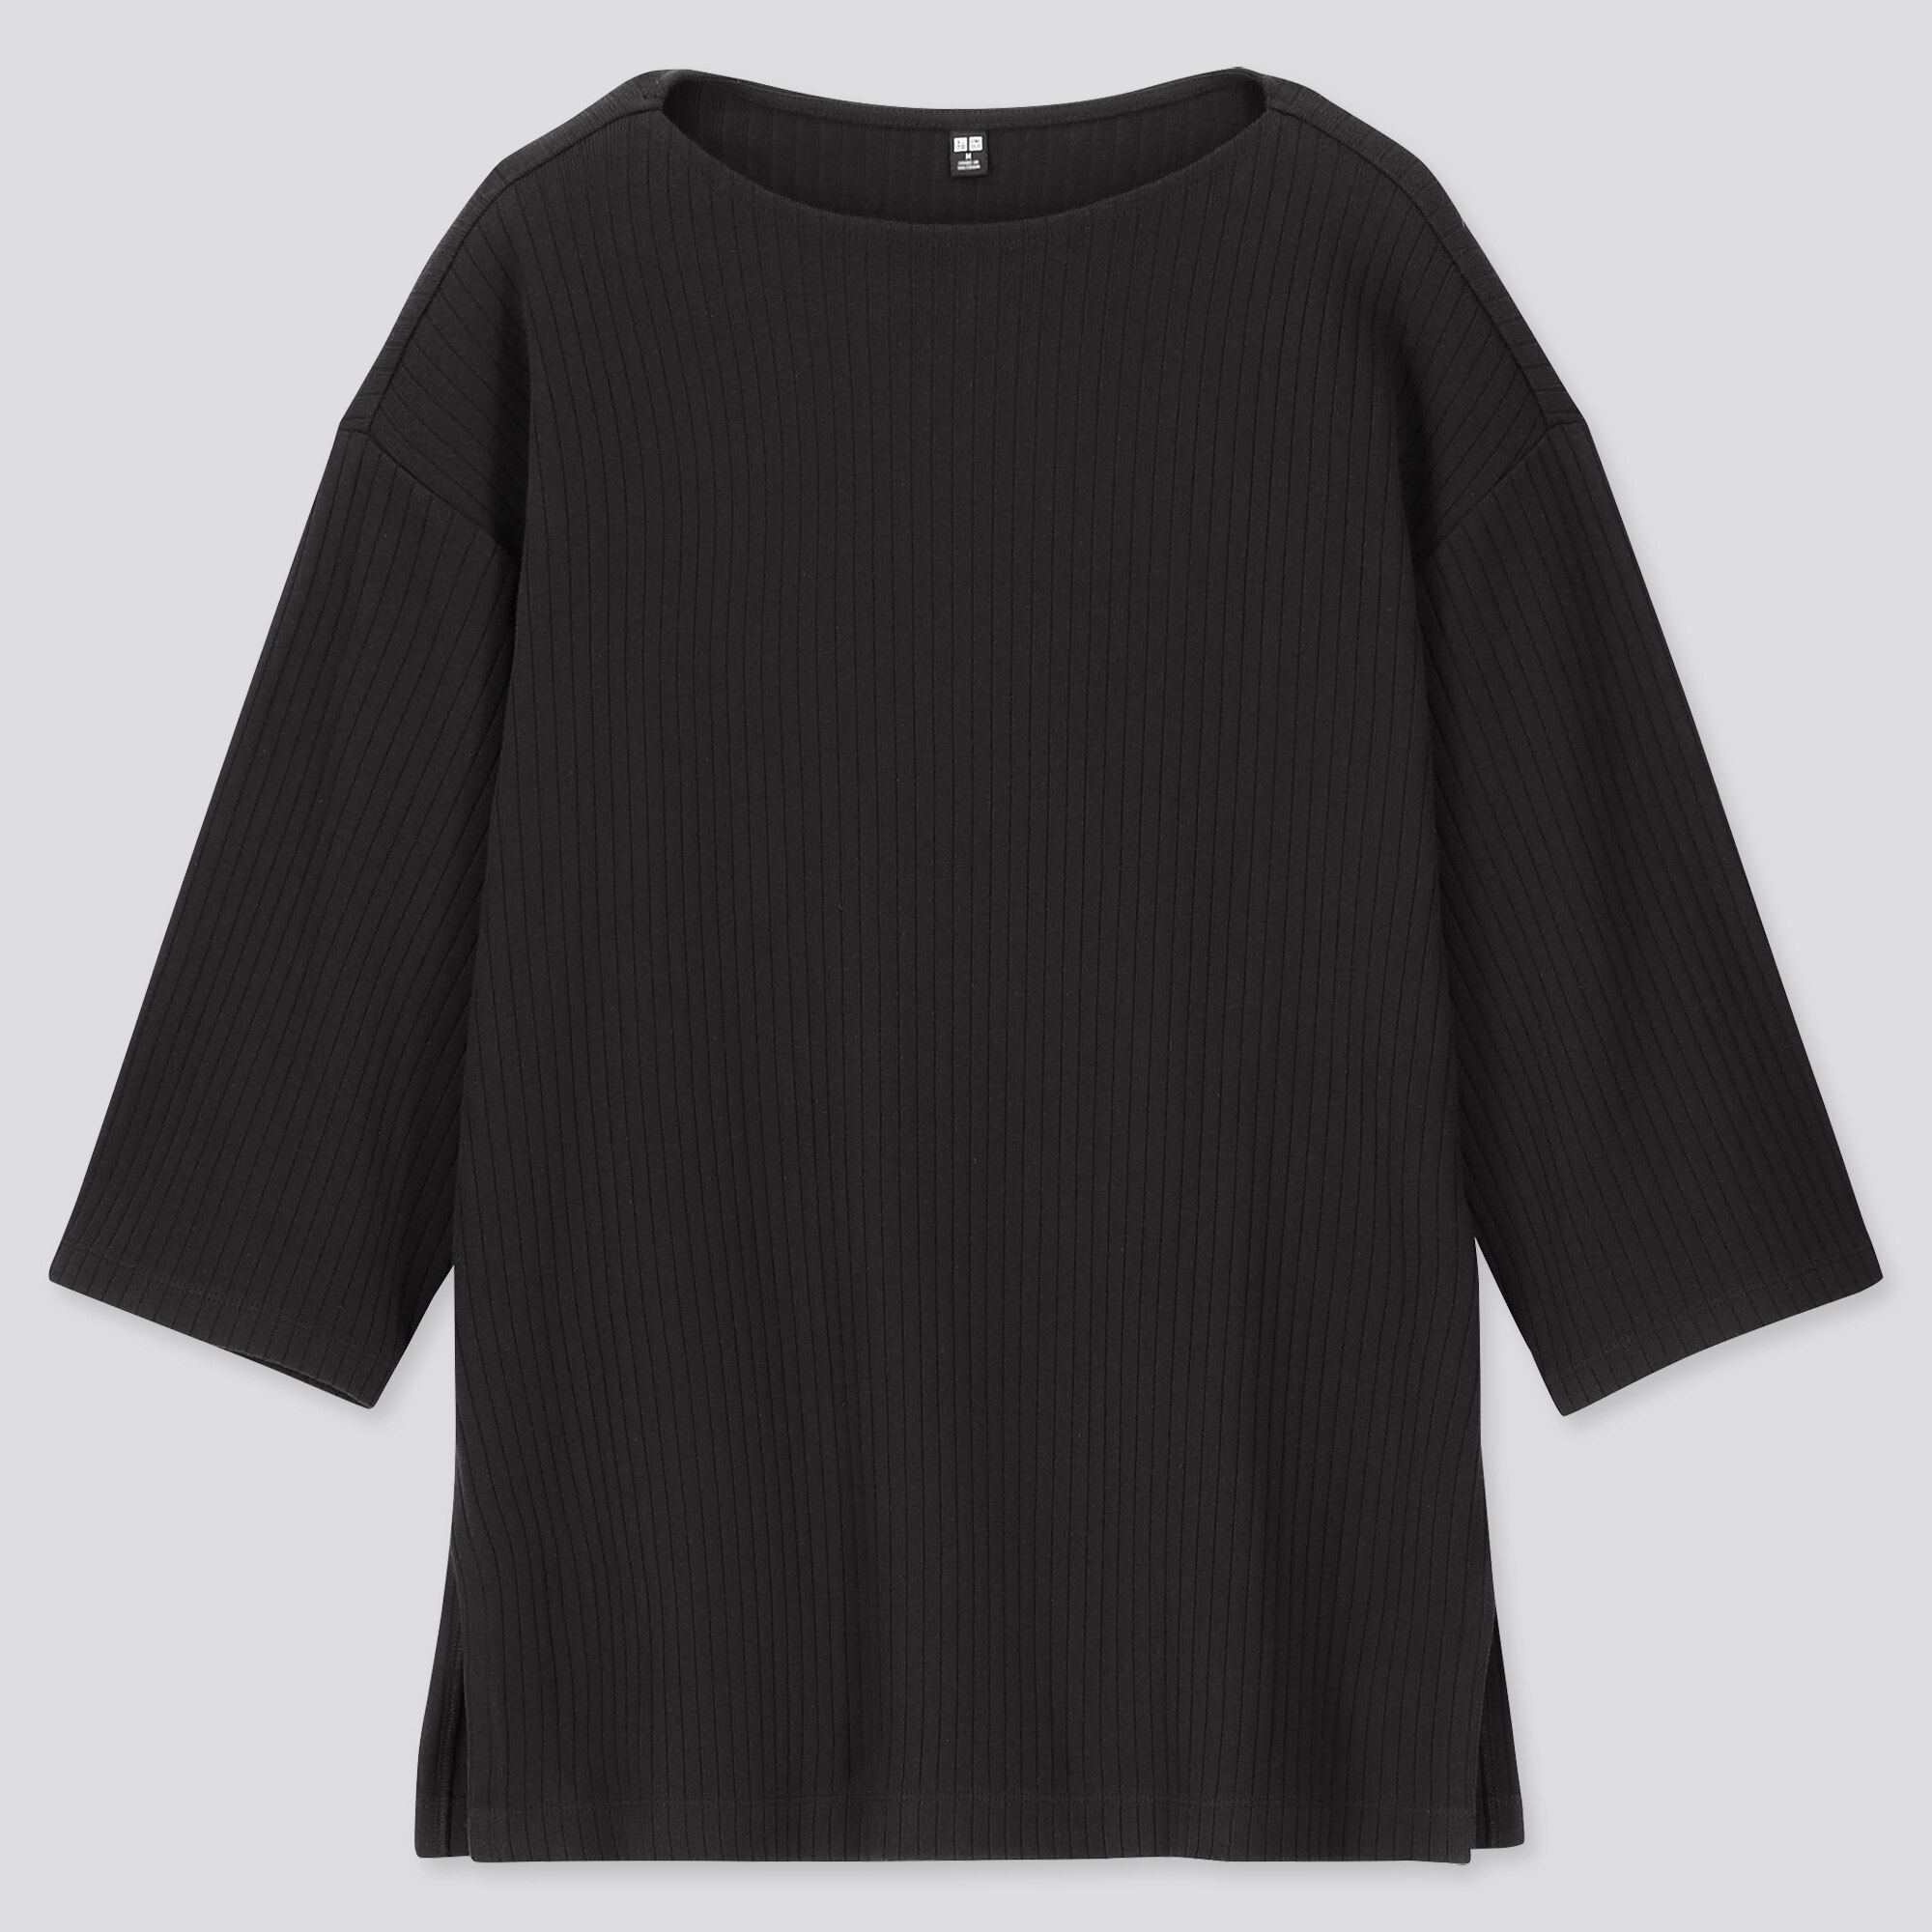 WOMEN WIDE-RIBBED RELAXED 3/4 SLEEVE TUNIC